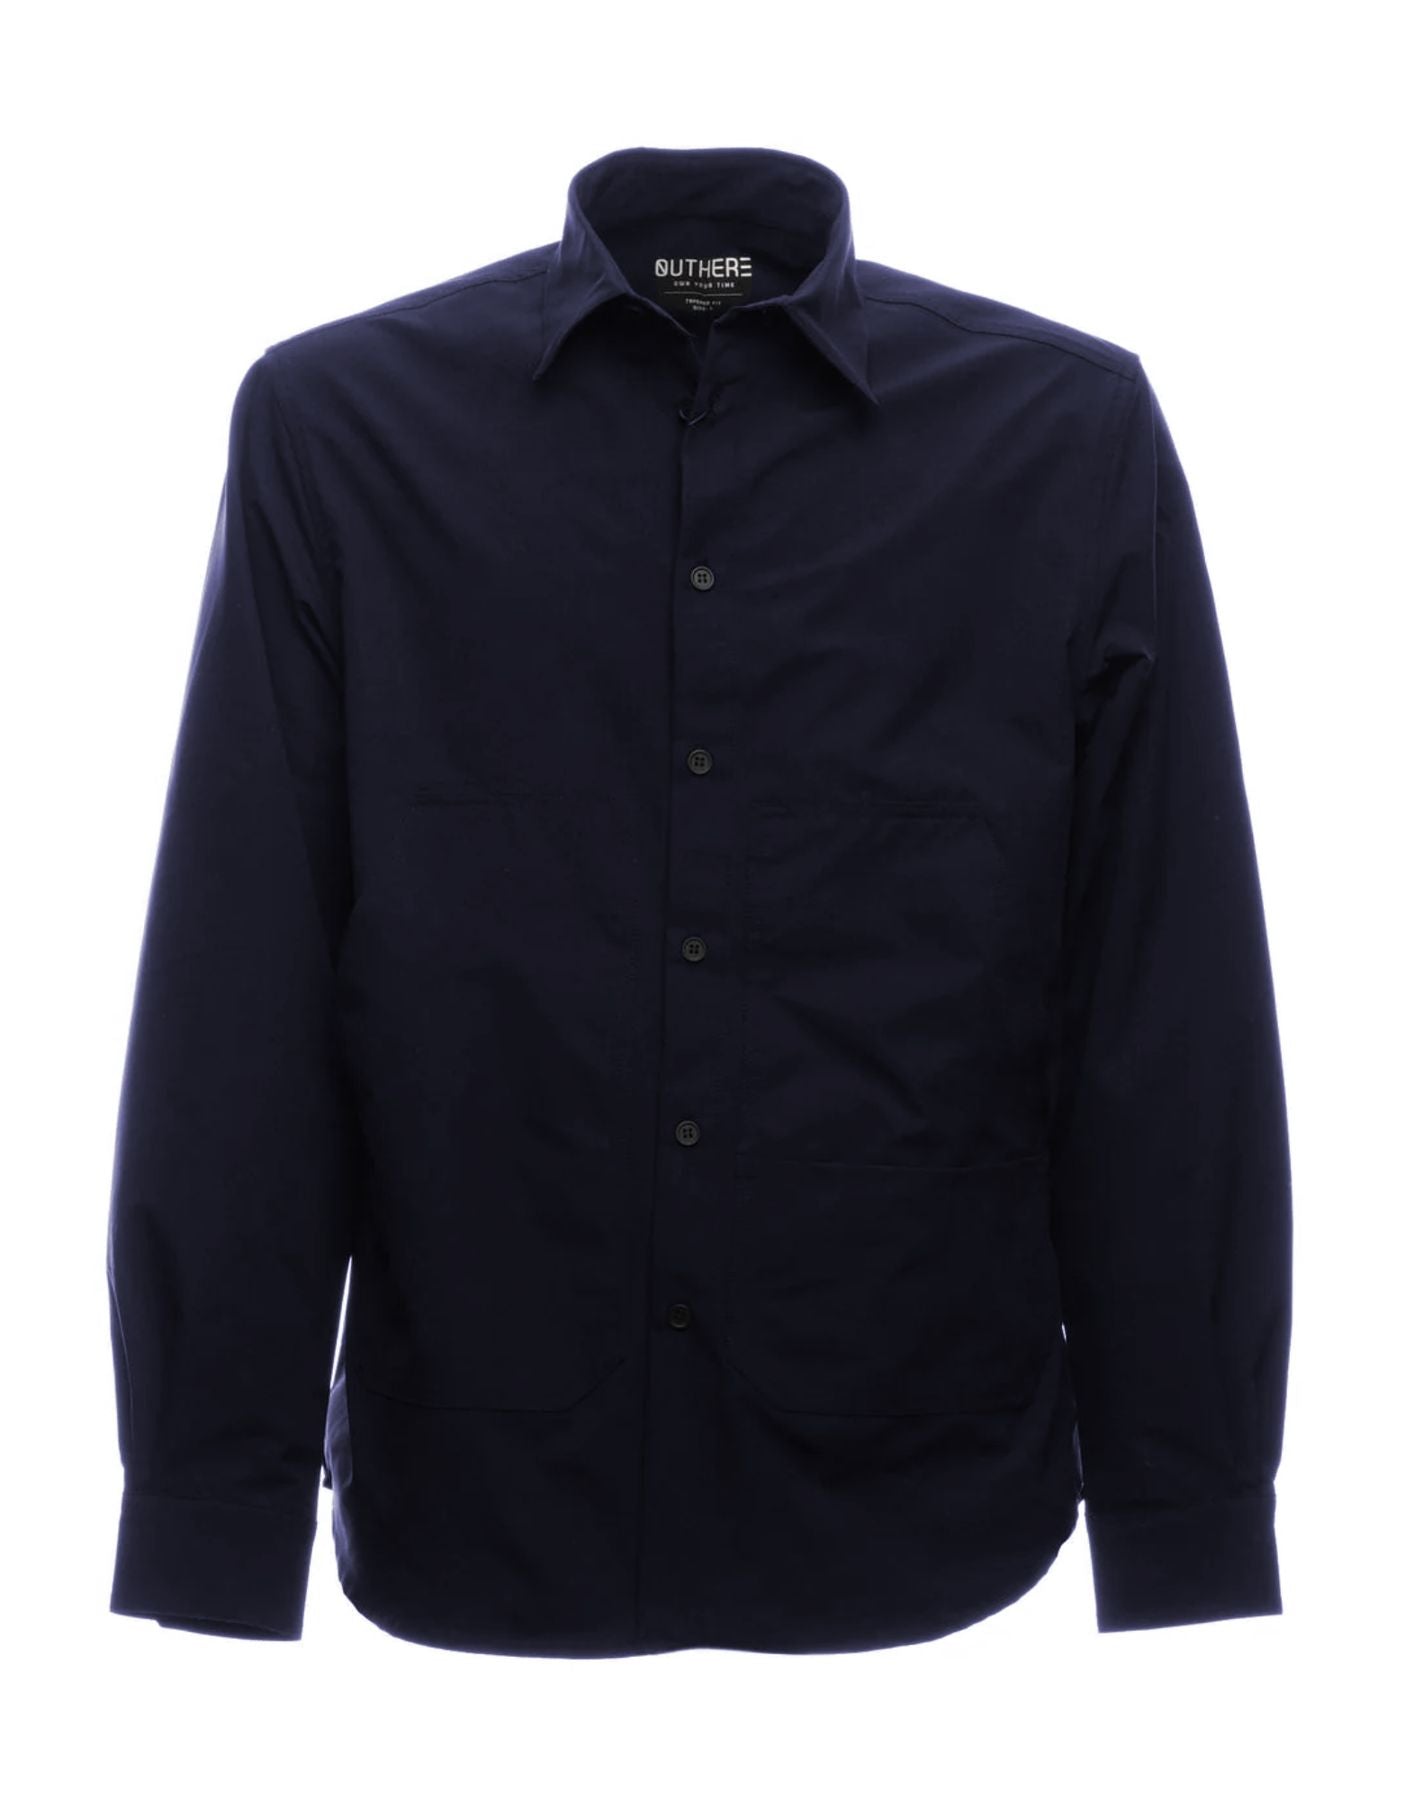 Shirt for man EOTM142AG42 NAVY OUTHERE